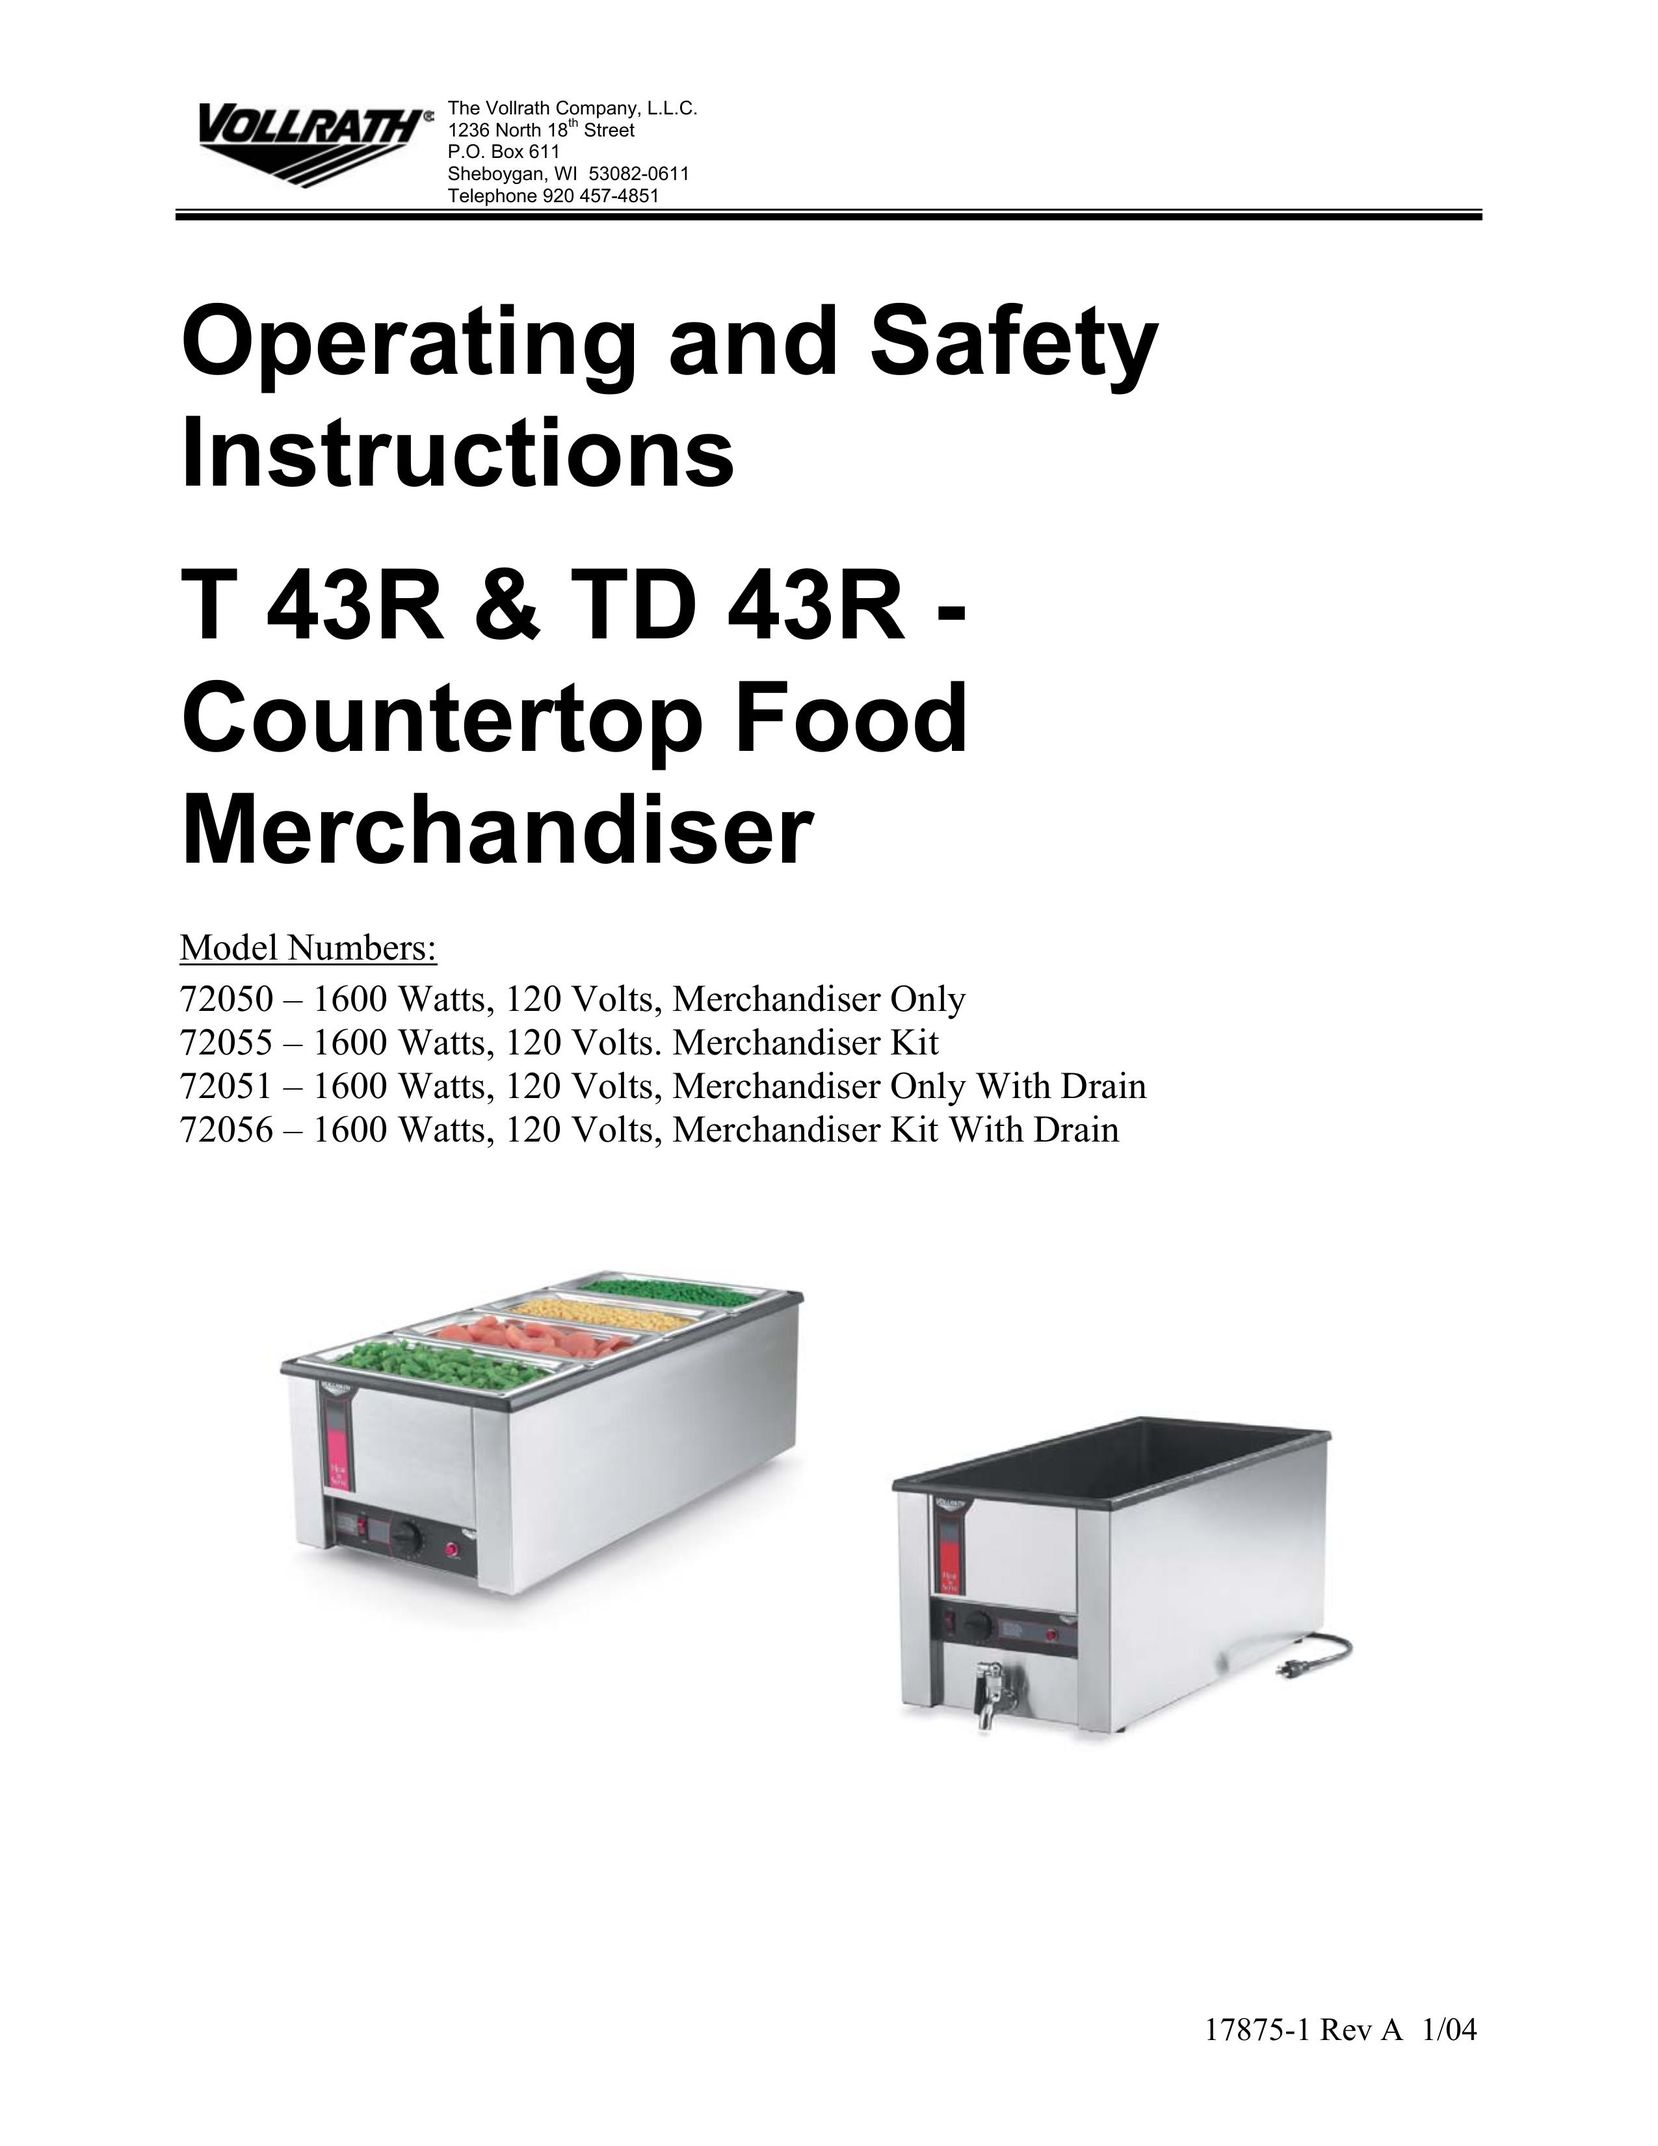 The Vollrath Co TD 43R Cookware User Manual